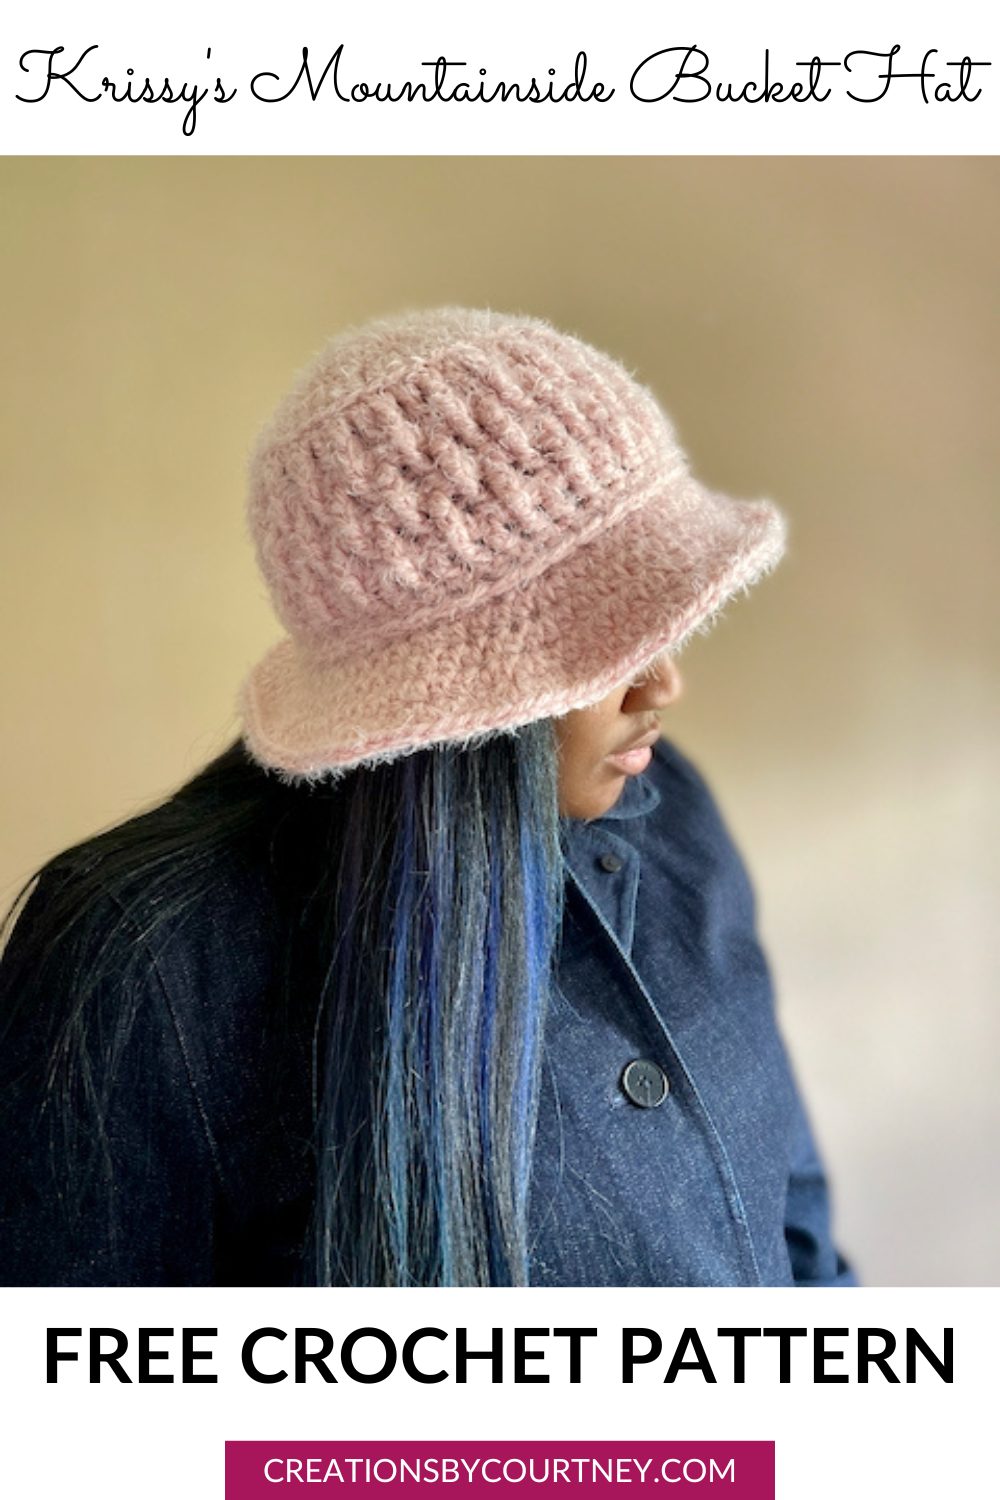 A picture of a woman with blue highlights in her black hair wearing a textured bucket crochet hat in a soft pink and fuzzy yarn.